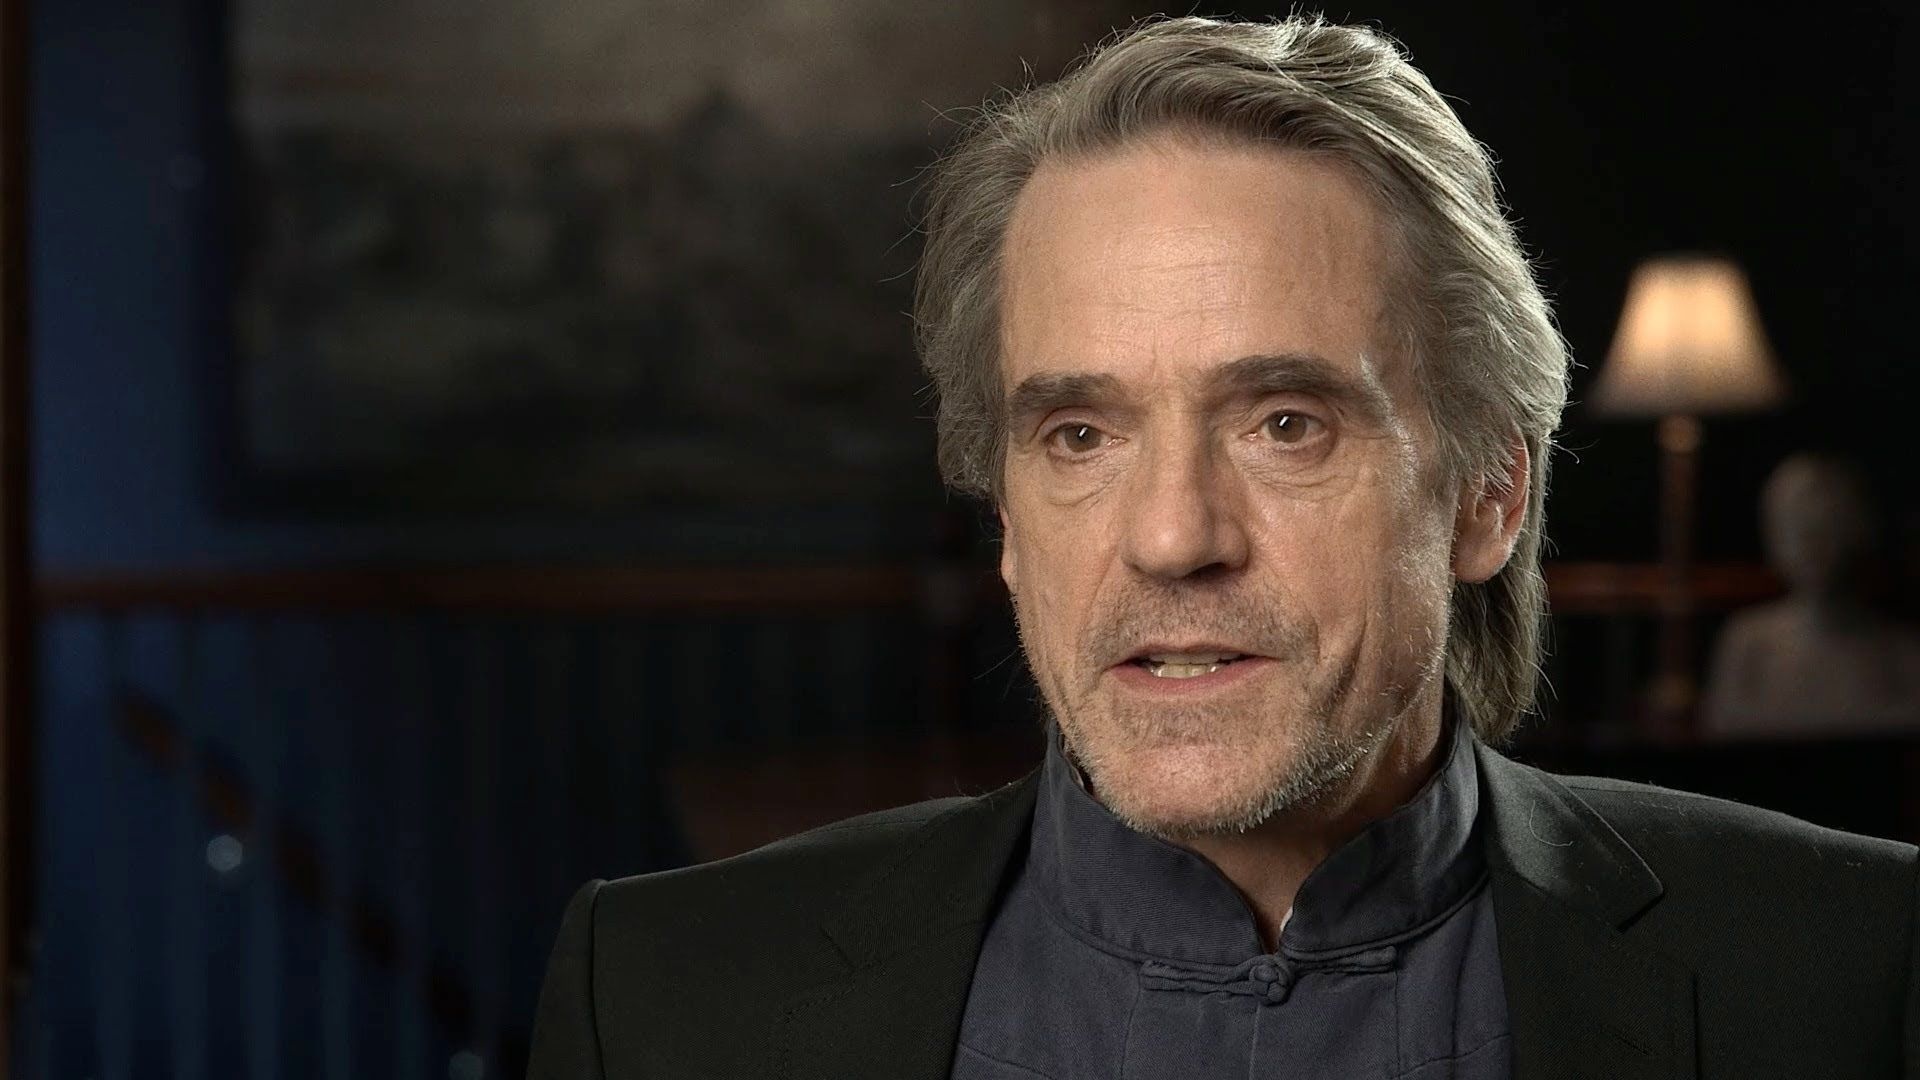 Jeremy Irons, Download free backgrounds, 1920x1080 Full HD Desktop